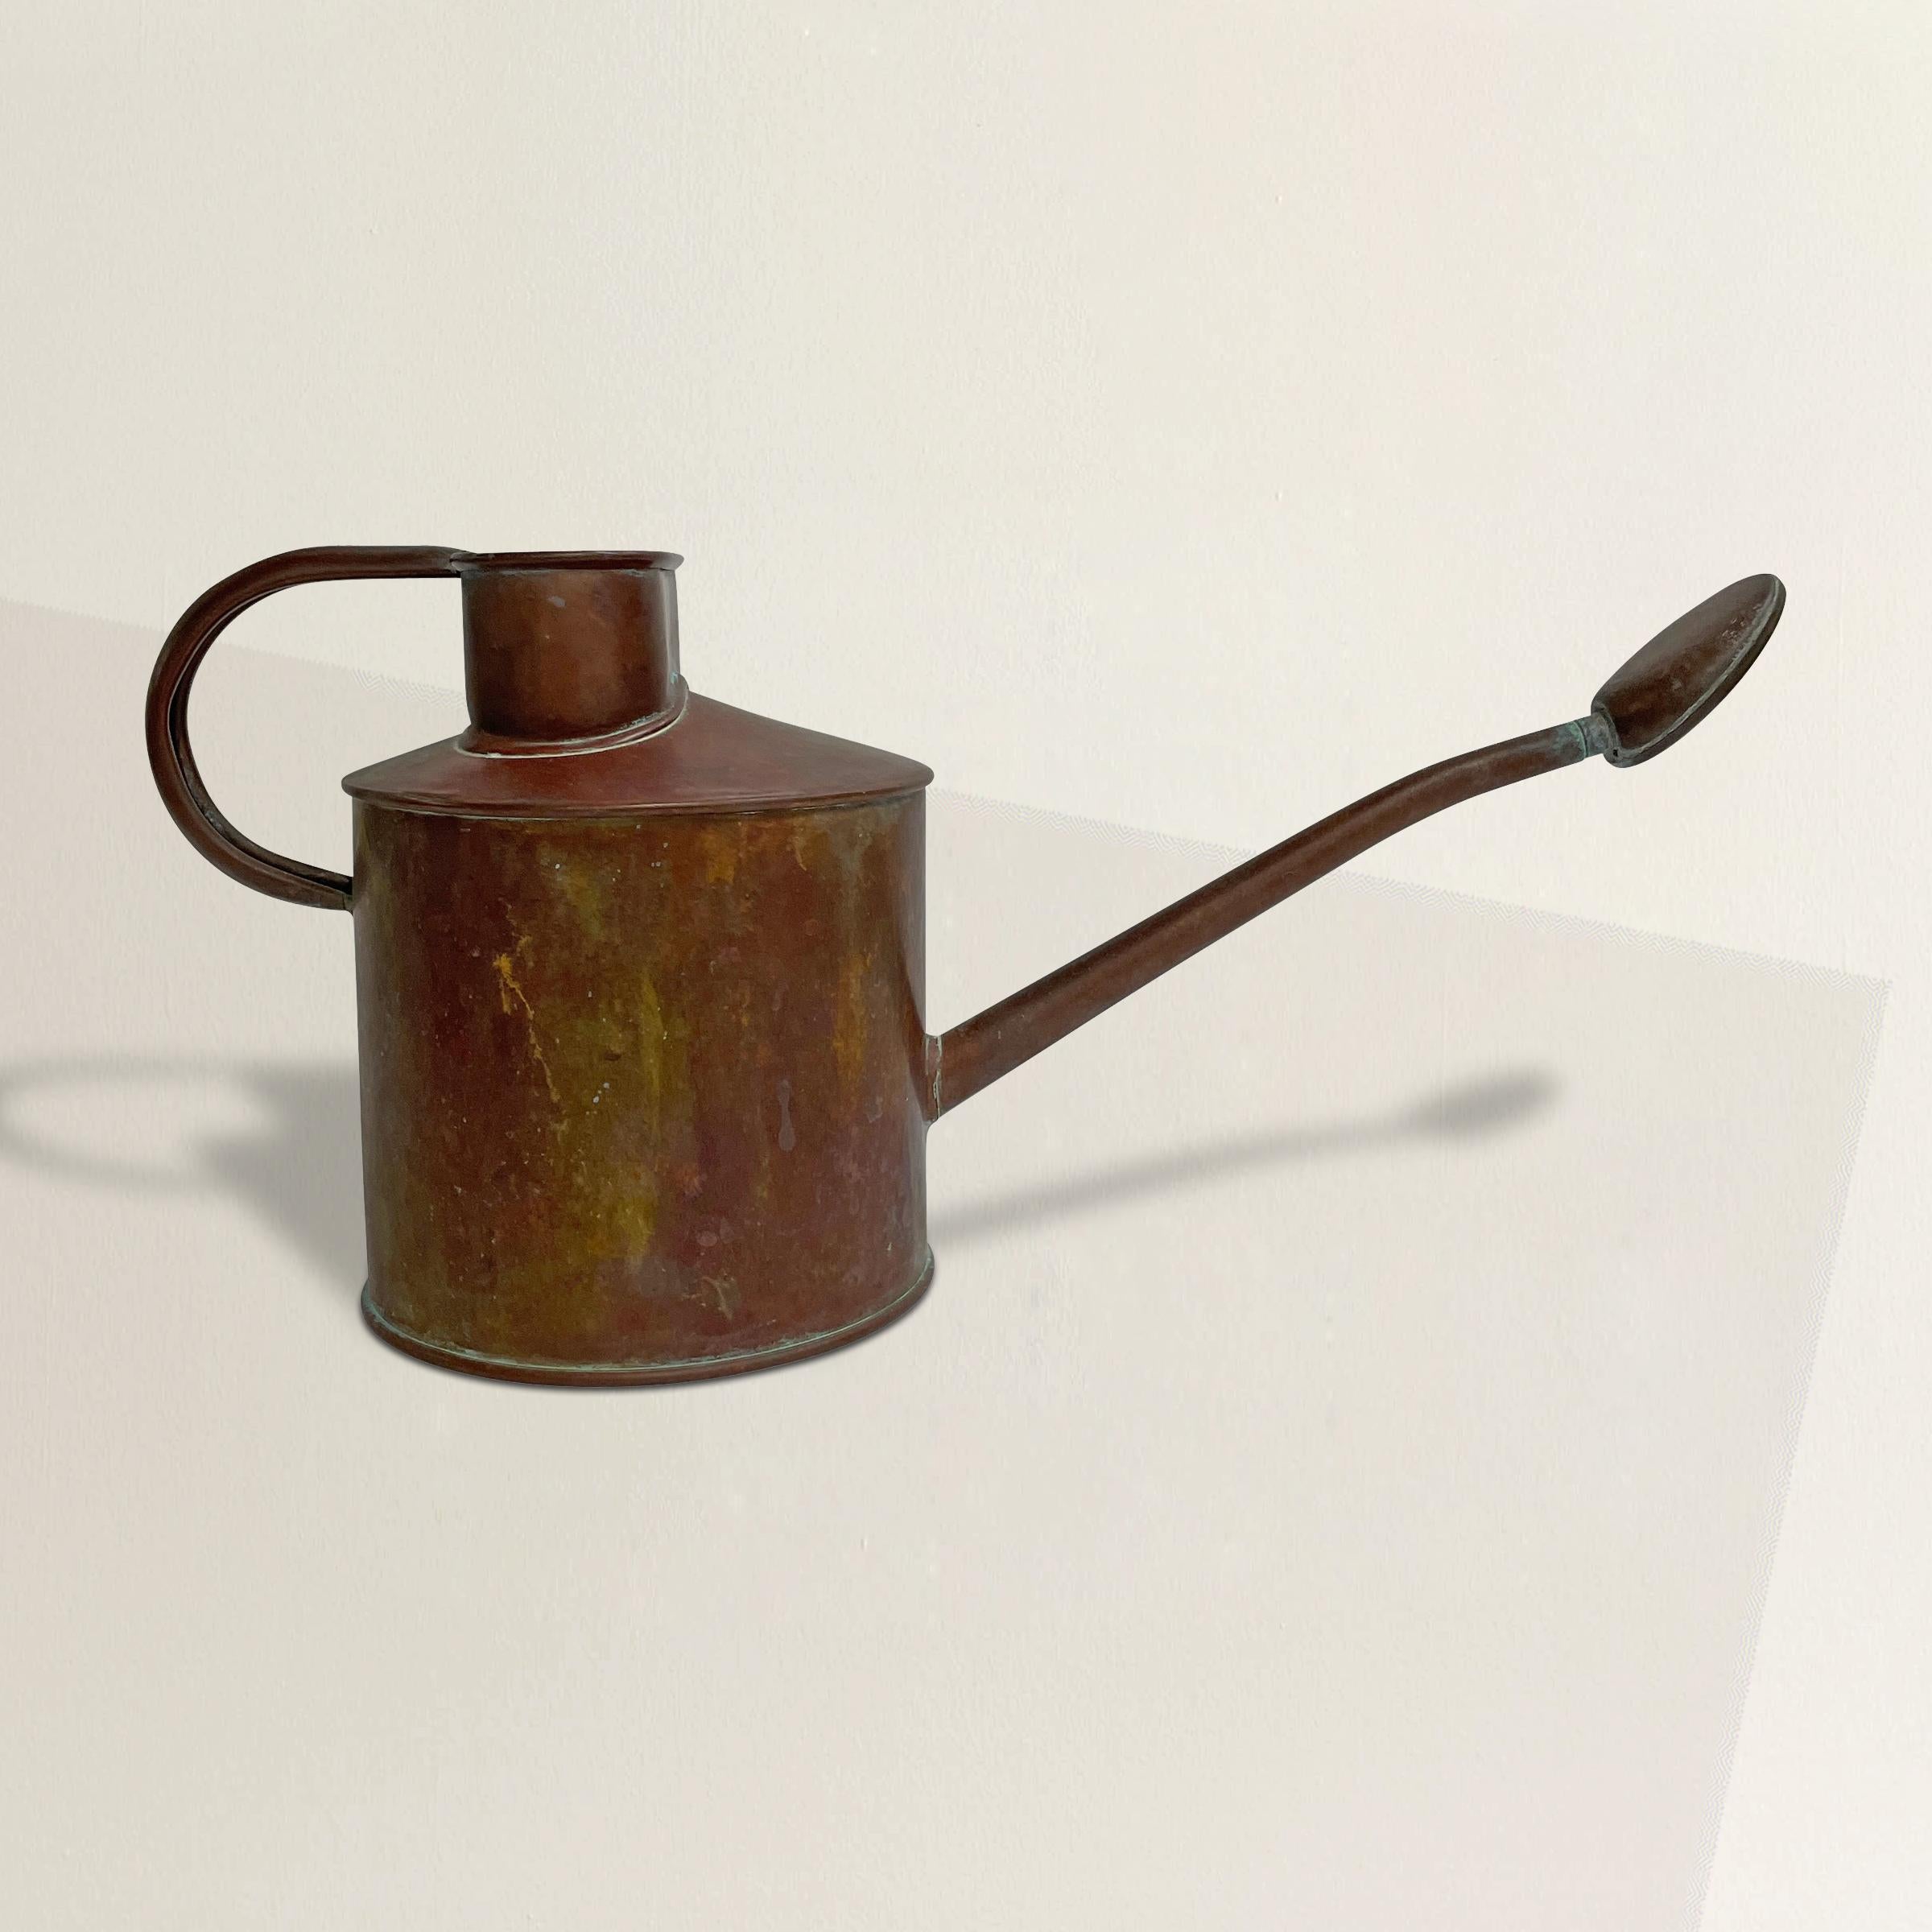 A faithful and hardworking vintage American copper watering can with a removable sprinkler head and fantastic patina that only time and use could bestow. Perfect for watering house plants, or smaller planters on your patio.